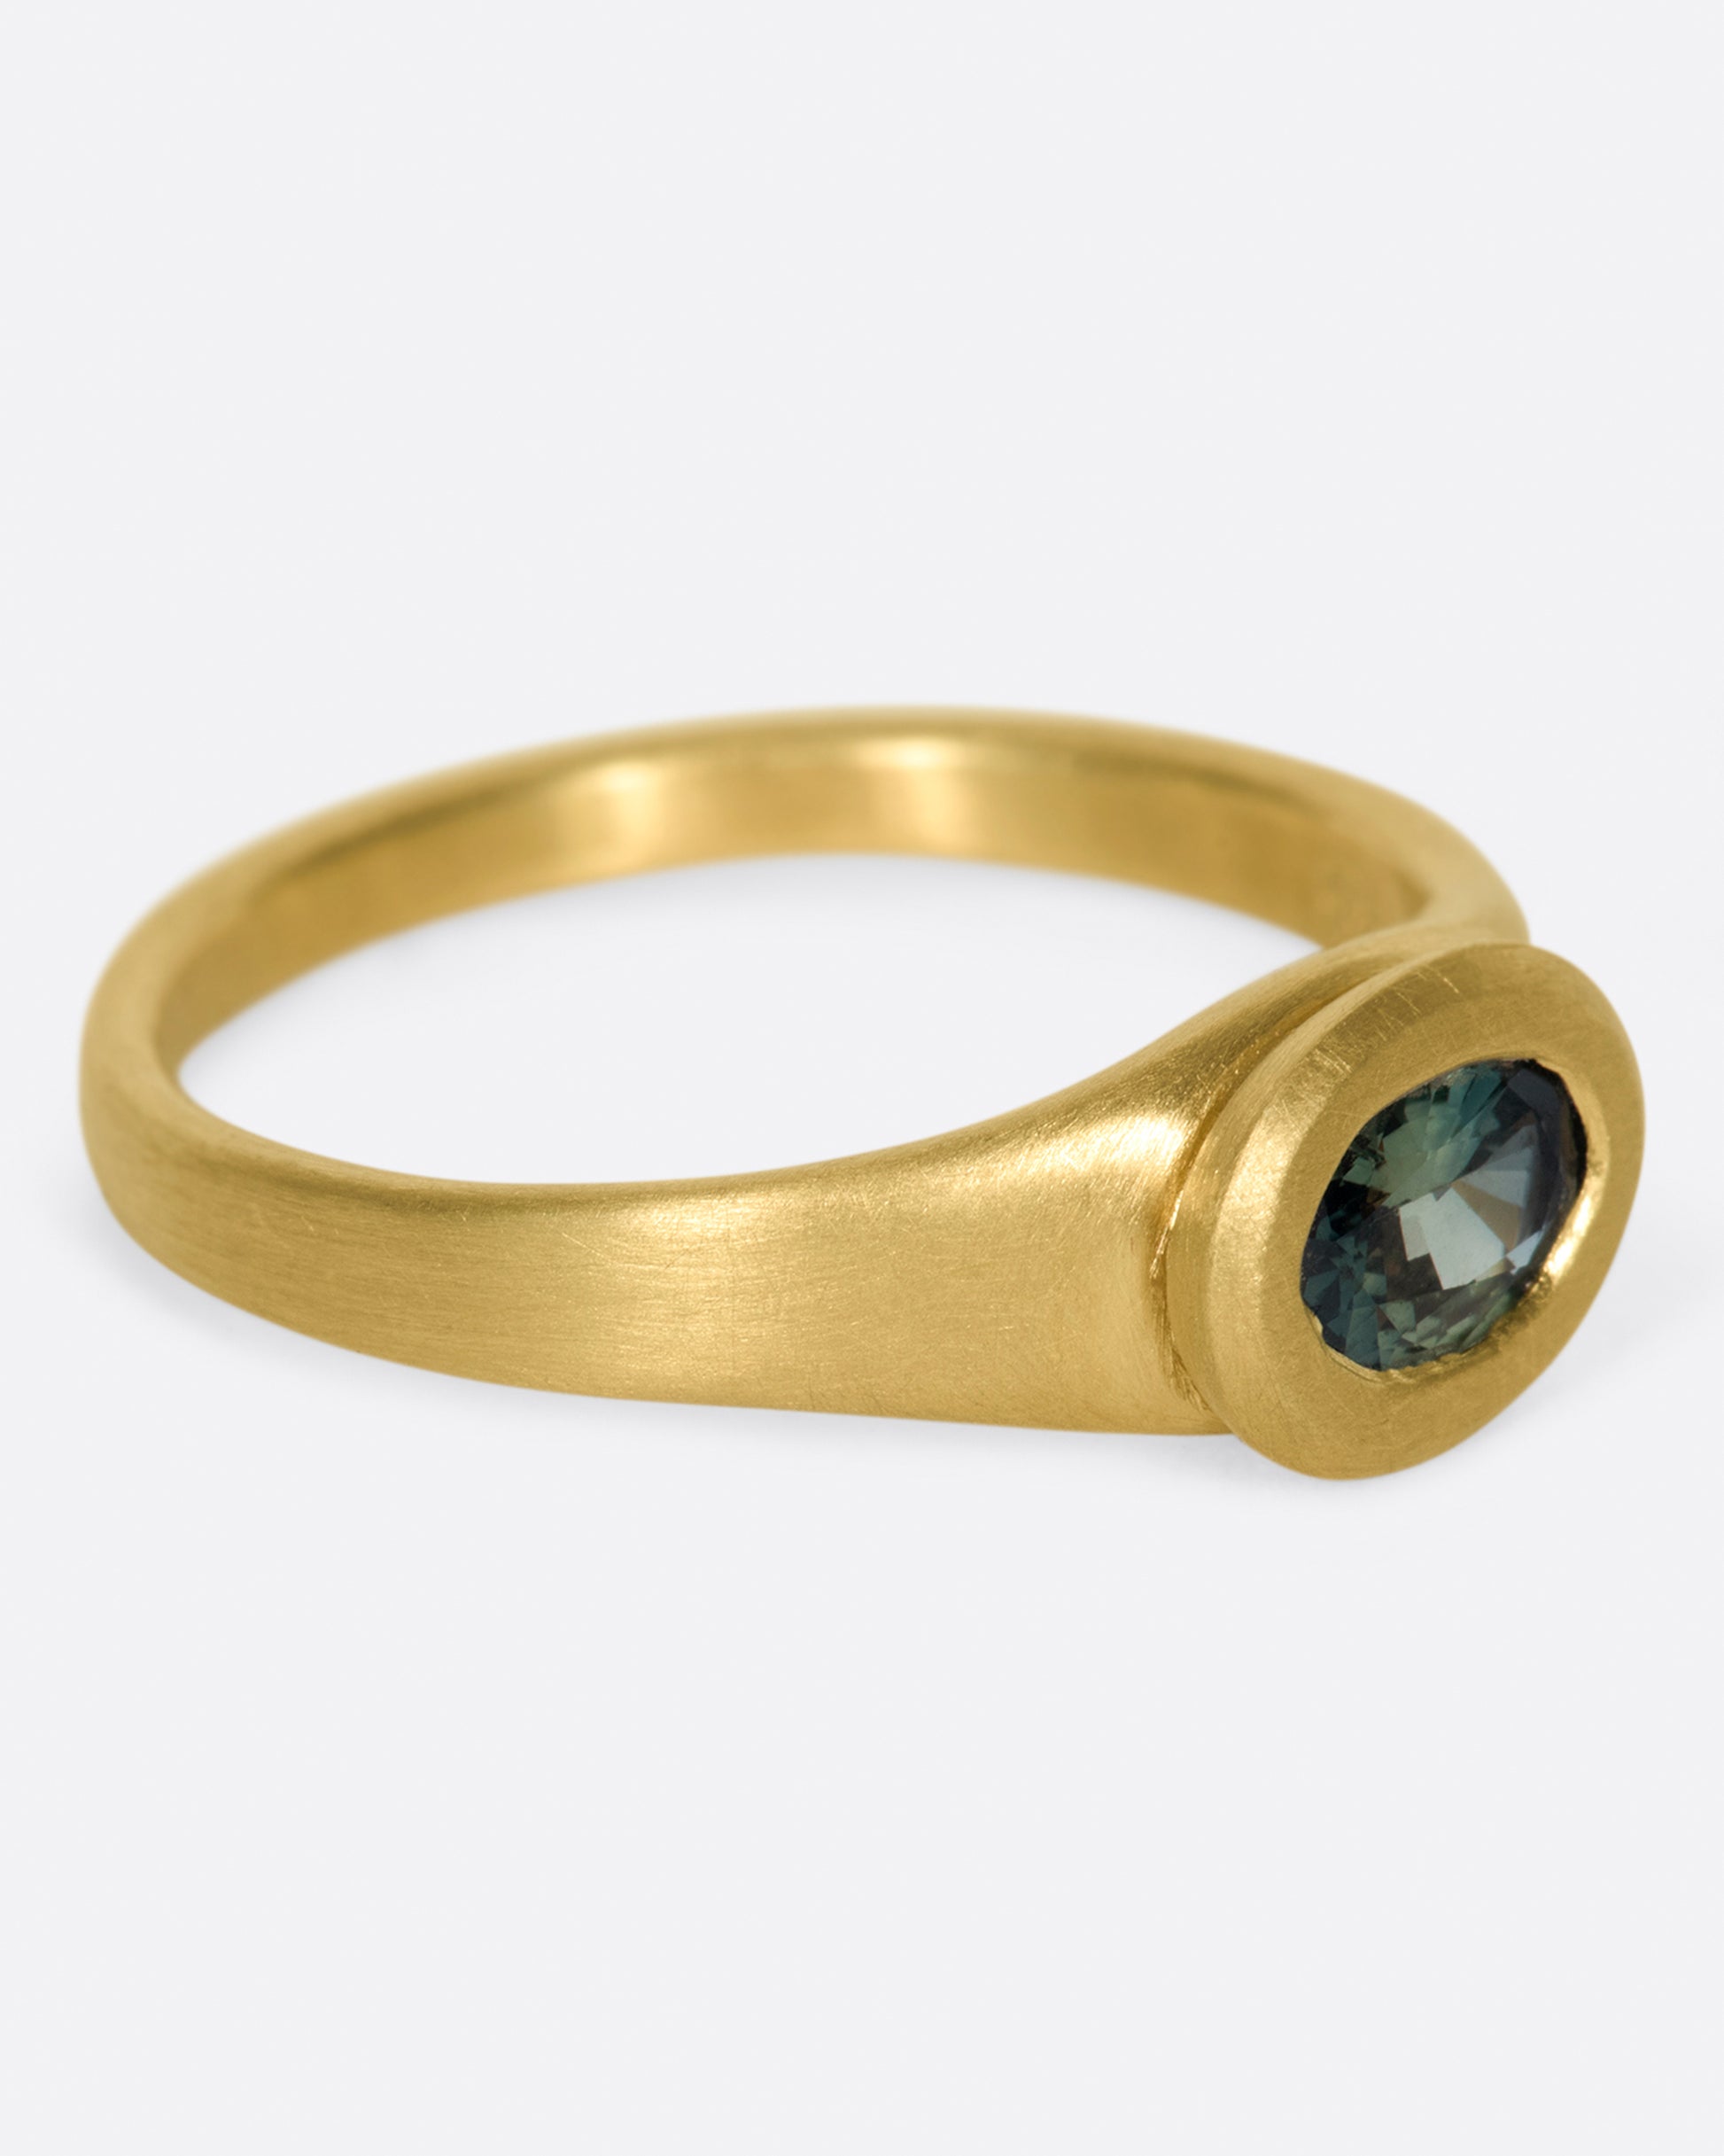 A one of a kind satin-finish gold ring with an oval blue-green Parti sapphire at its center.